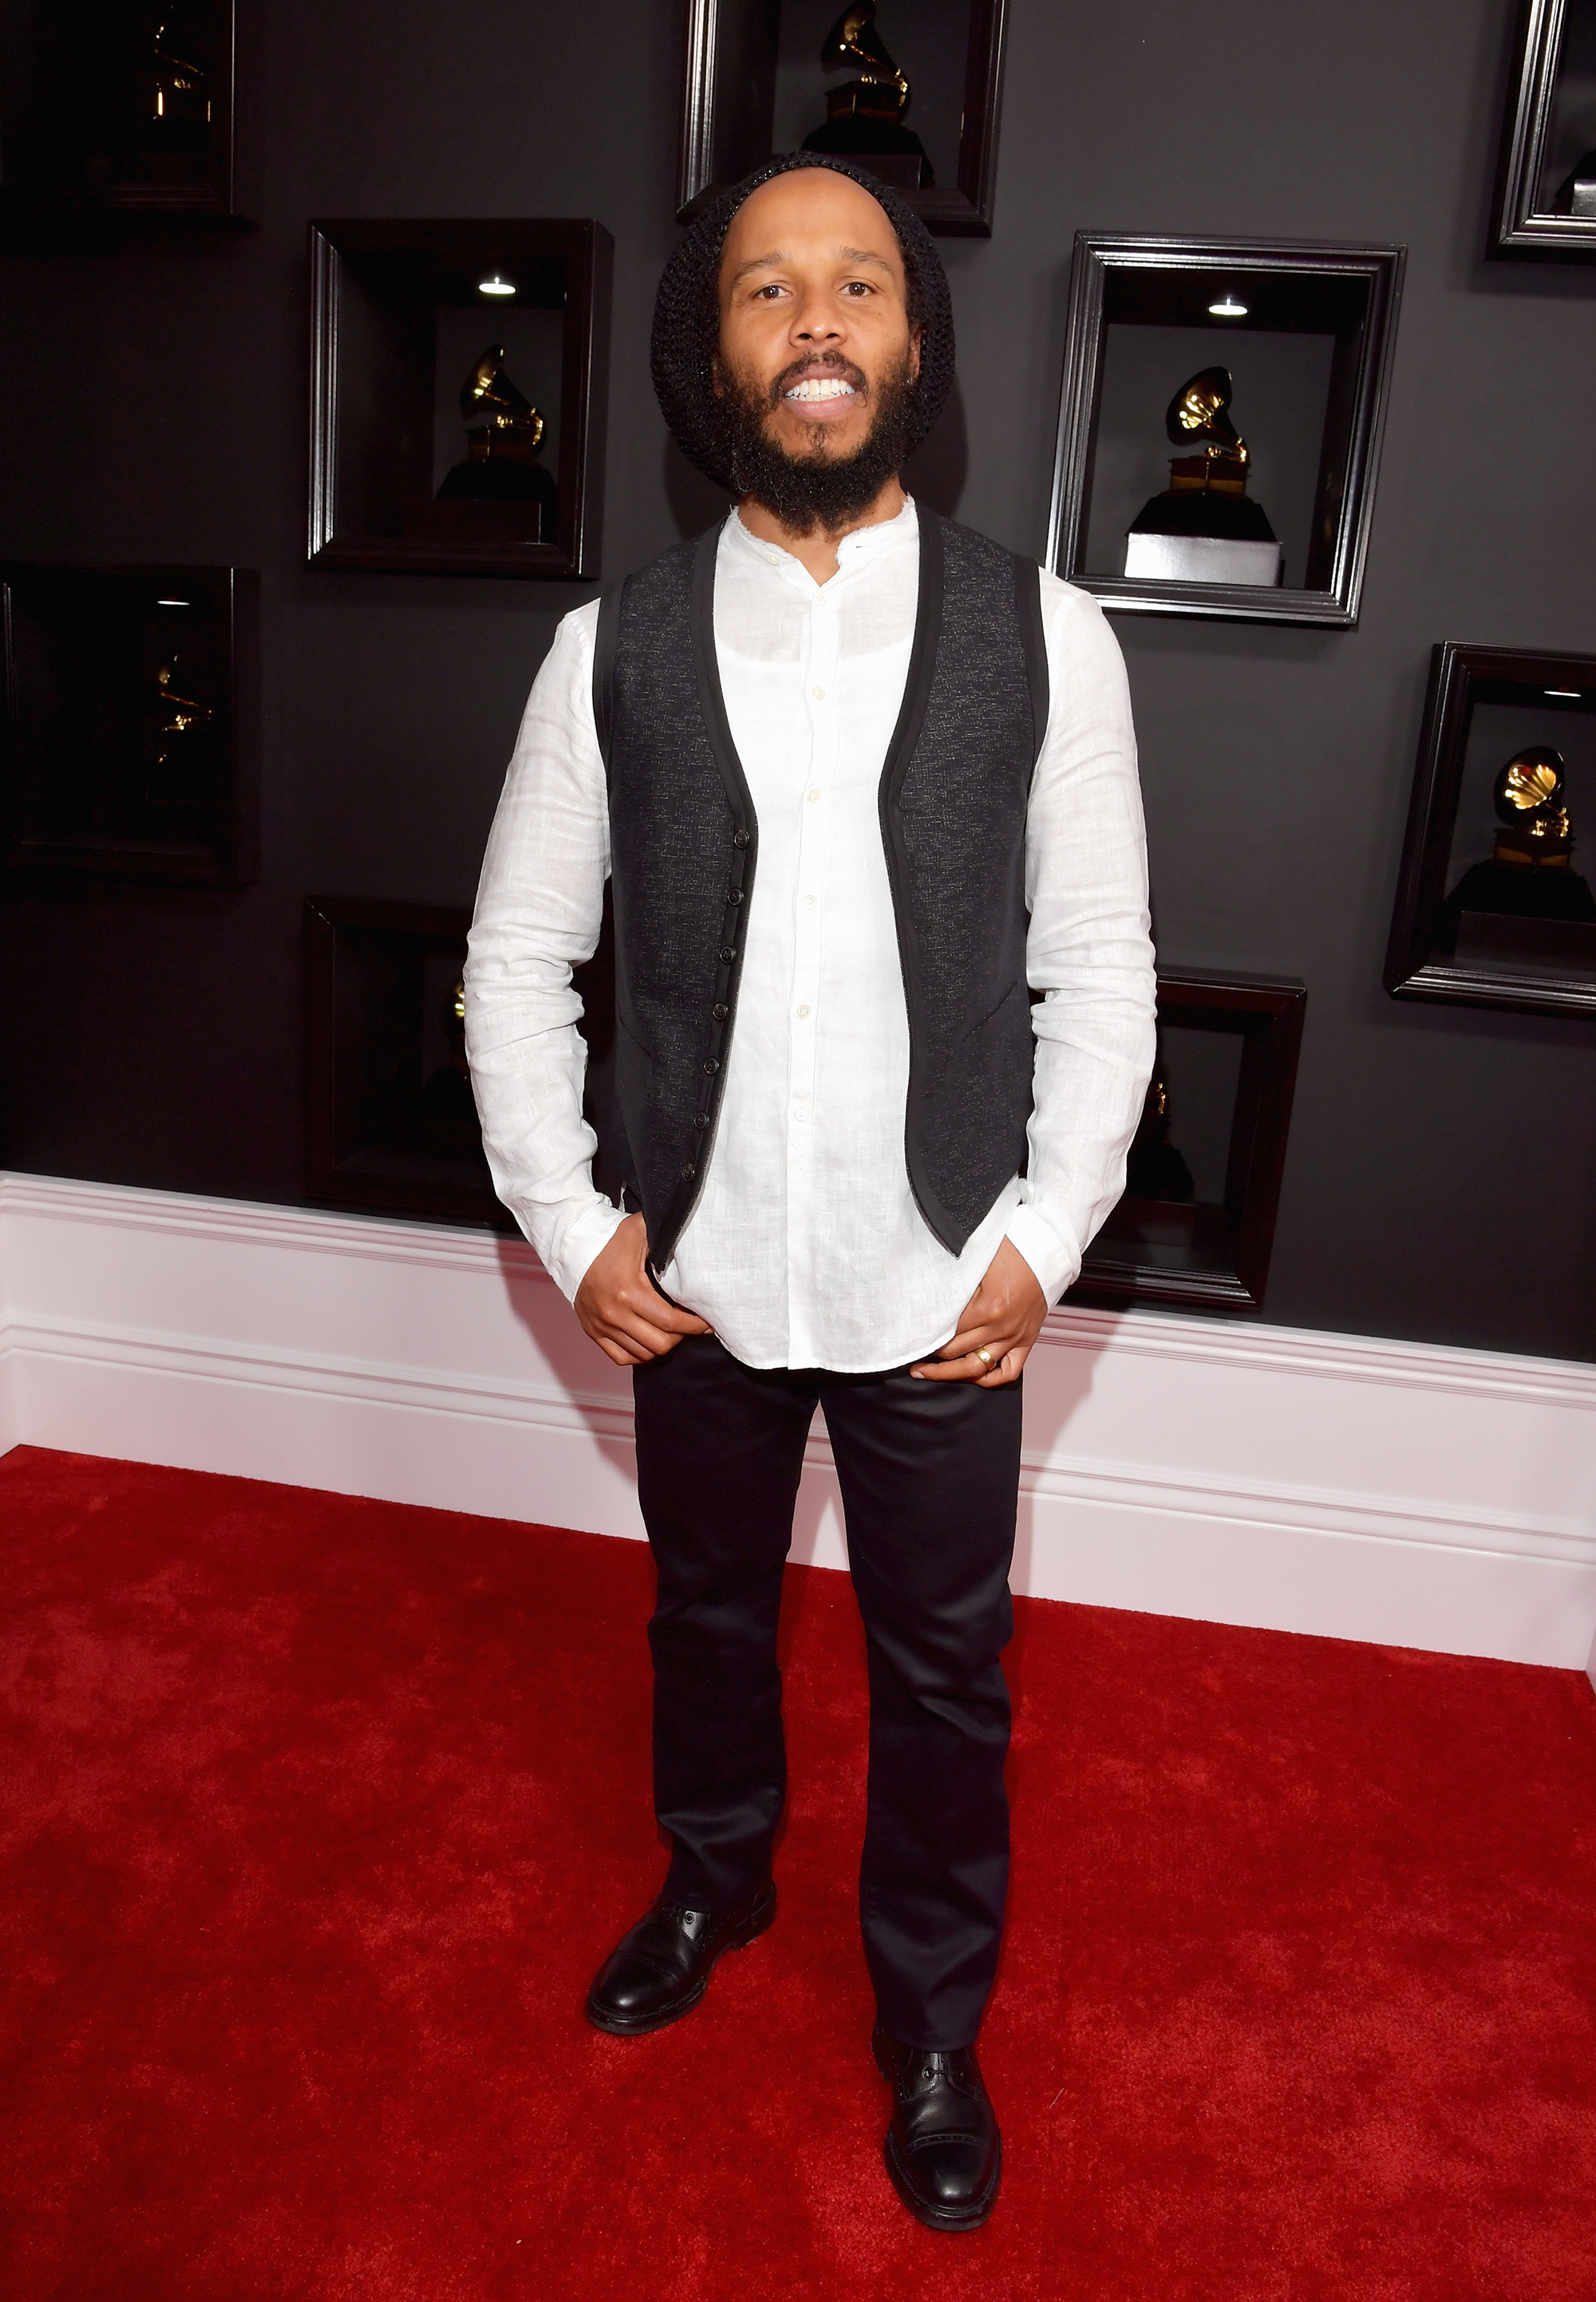 Ziggy Marley attends the 59th GRAMMY Awards at STAPLES Center, on Feb. 12, 2017 in Los Angeles.